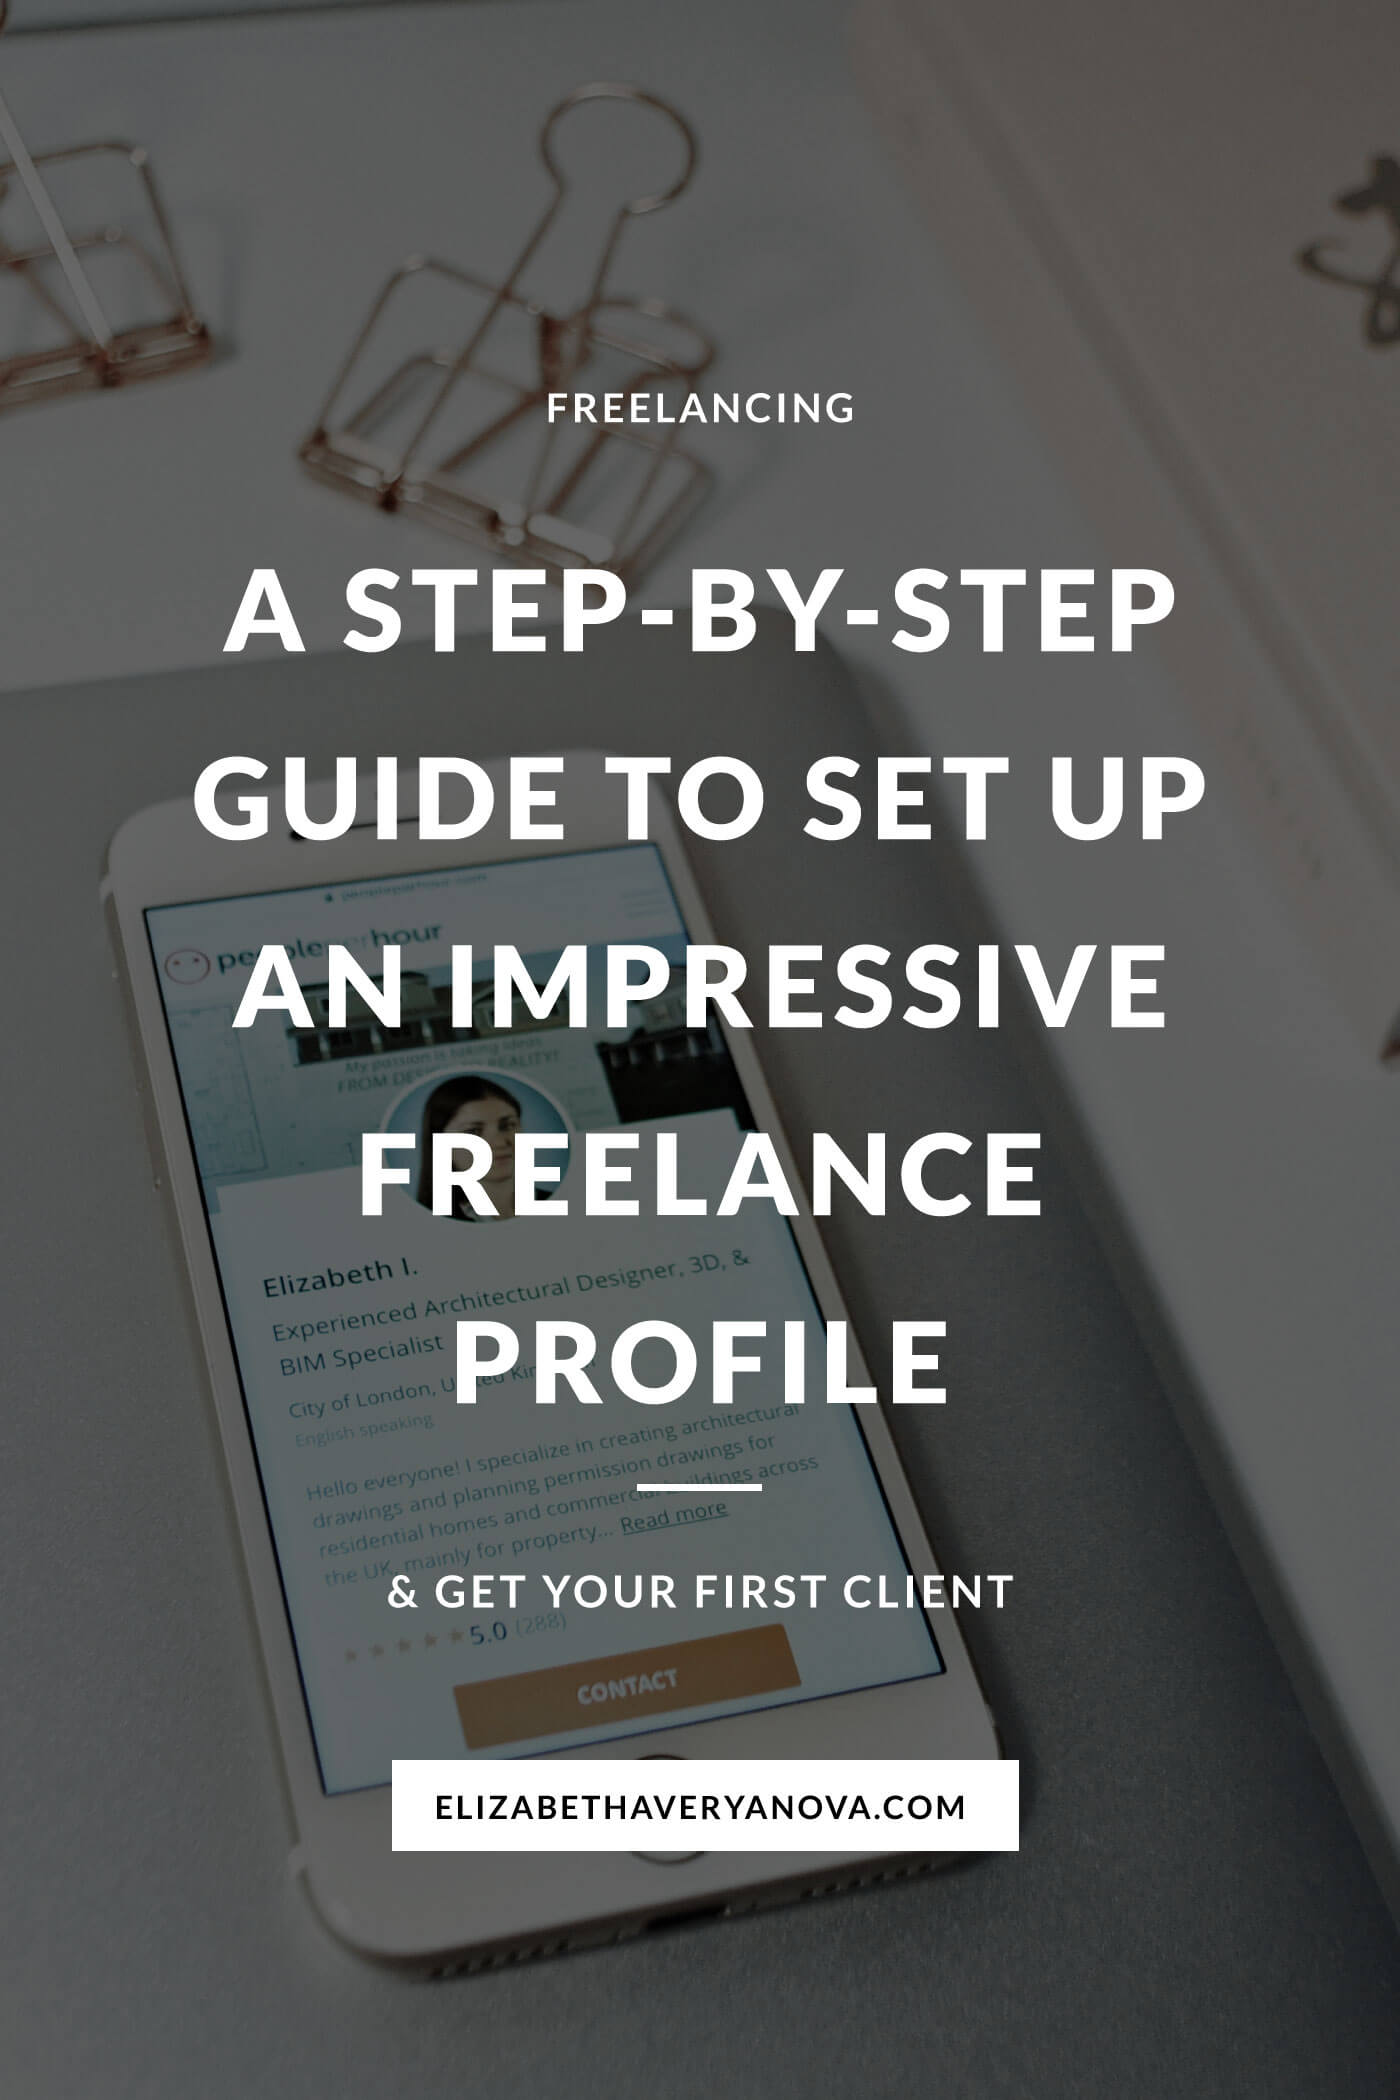 A Step-By-Step Guide To Set Up An Impressive Freelance Profile